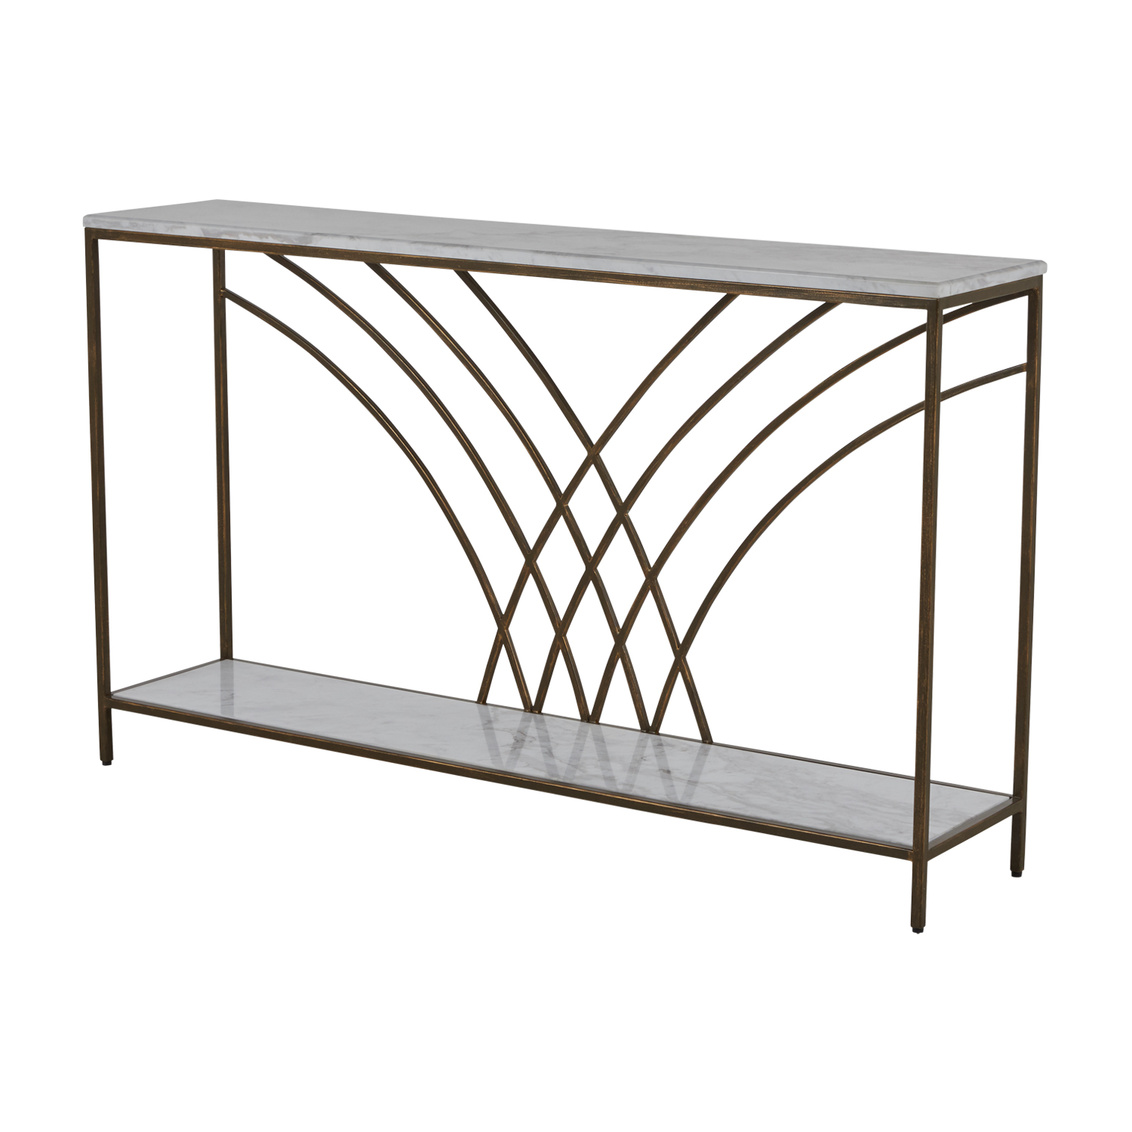 Curling Console Table-$1,465.00